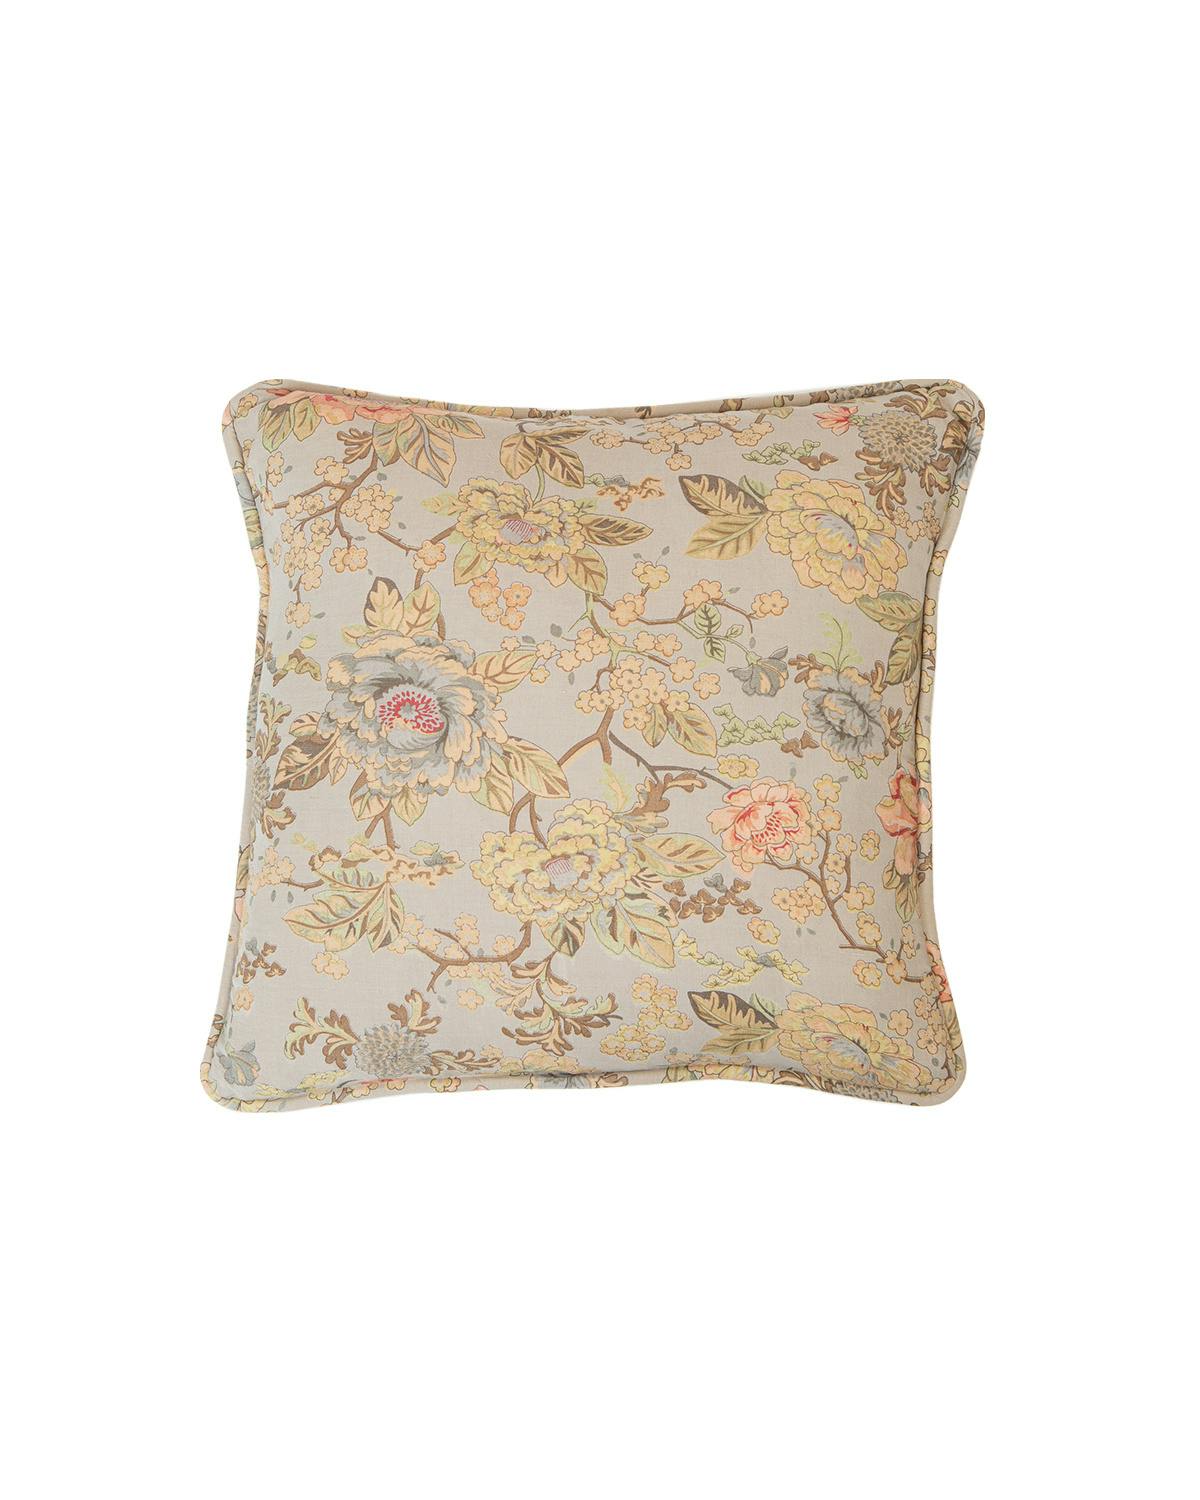 Cushion with Piping 50 x 50cm, Dusty Flower. Image #1